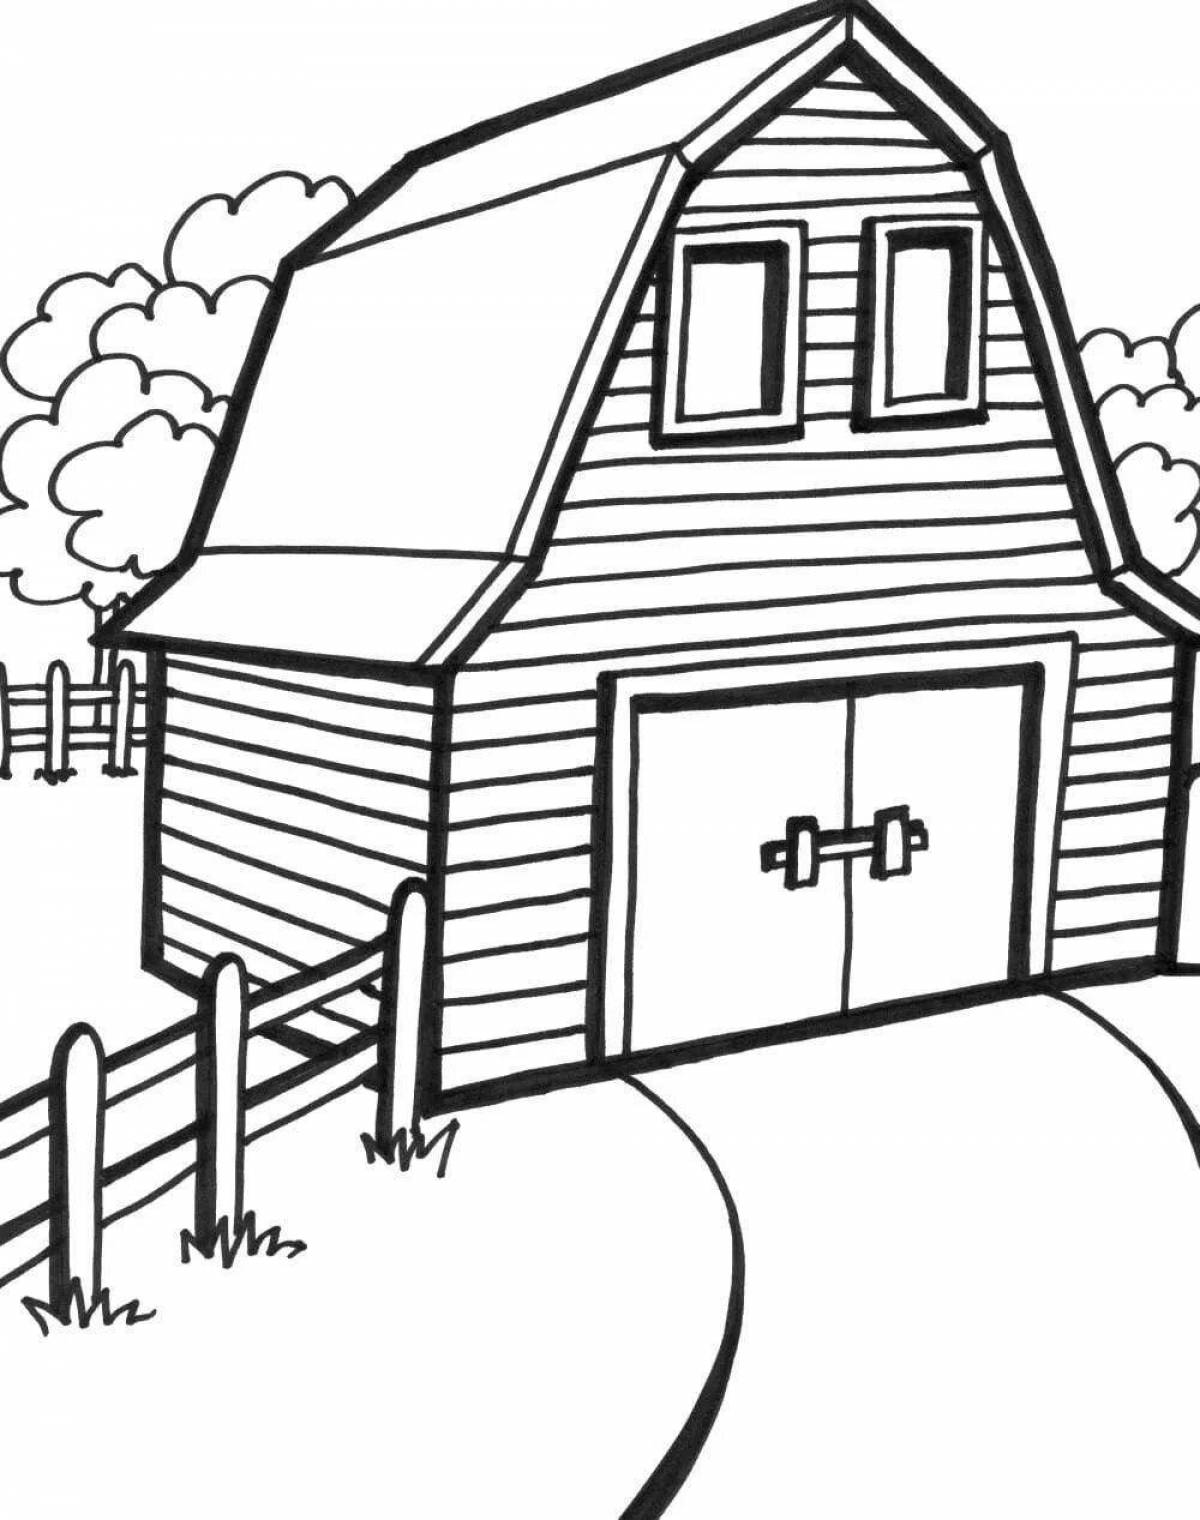 Coloring page quaint country house for kids